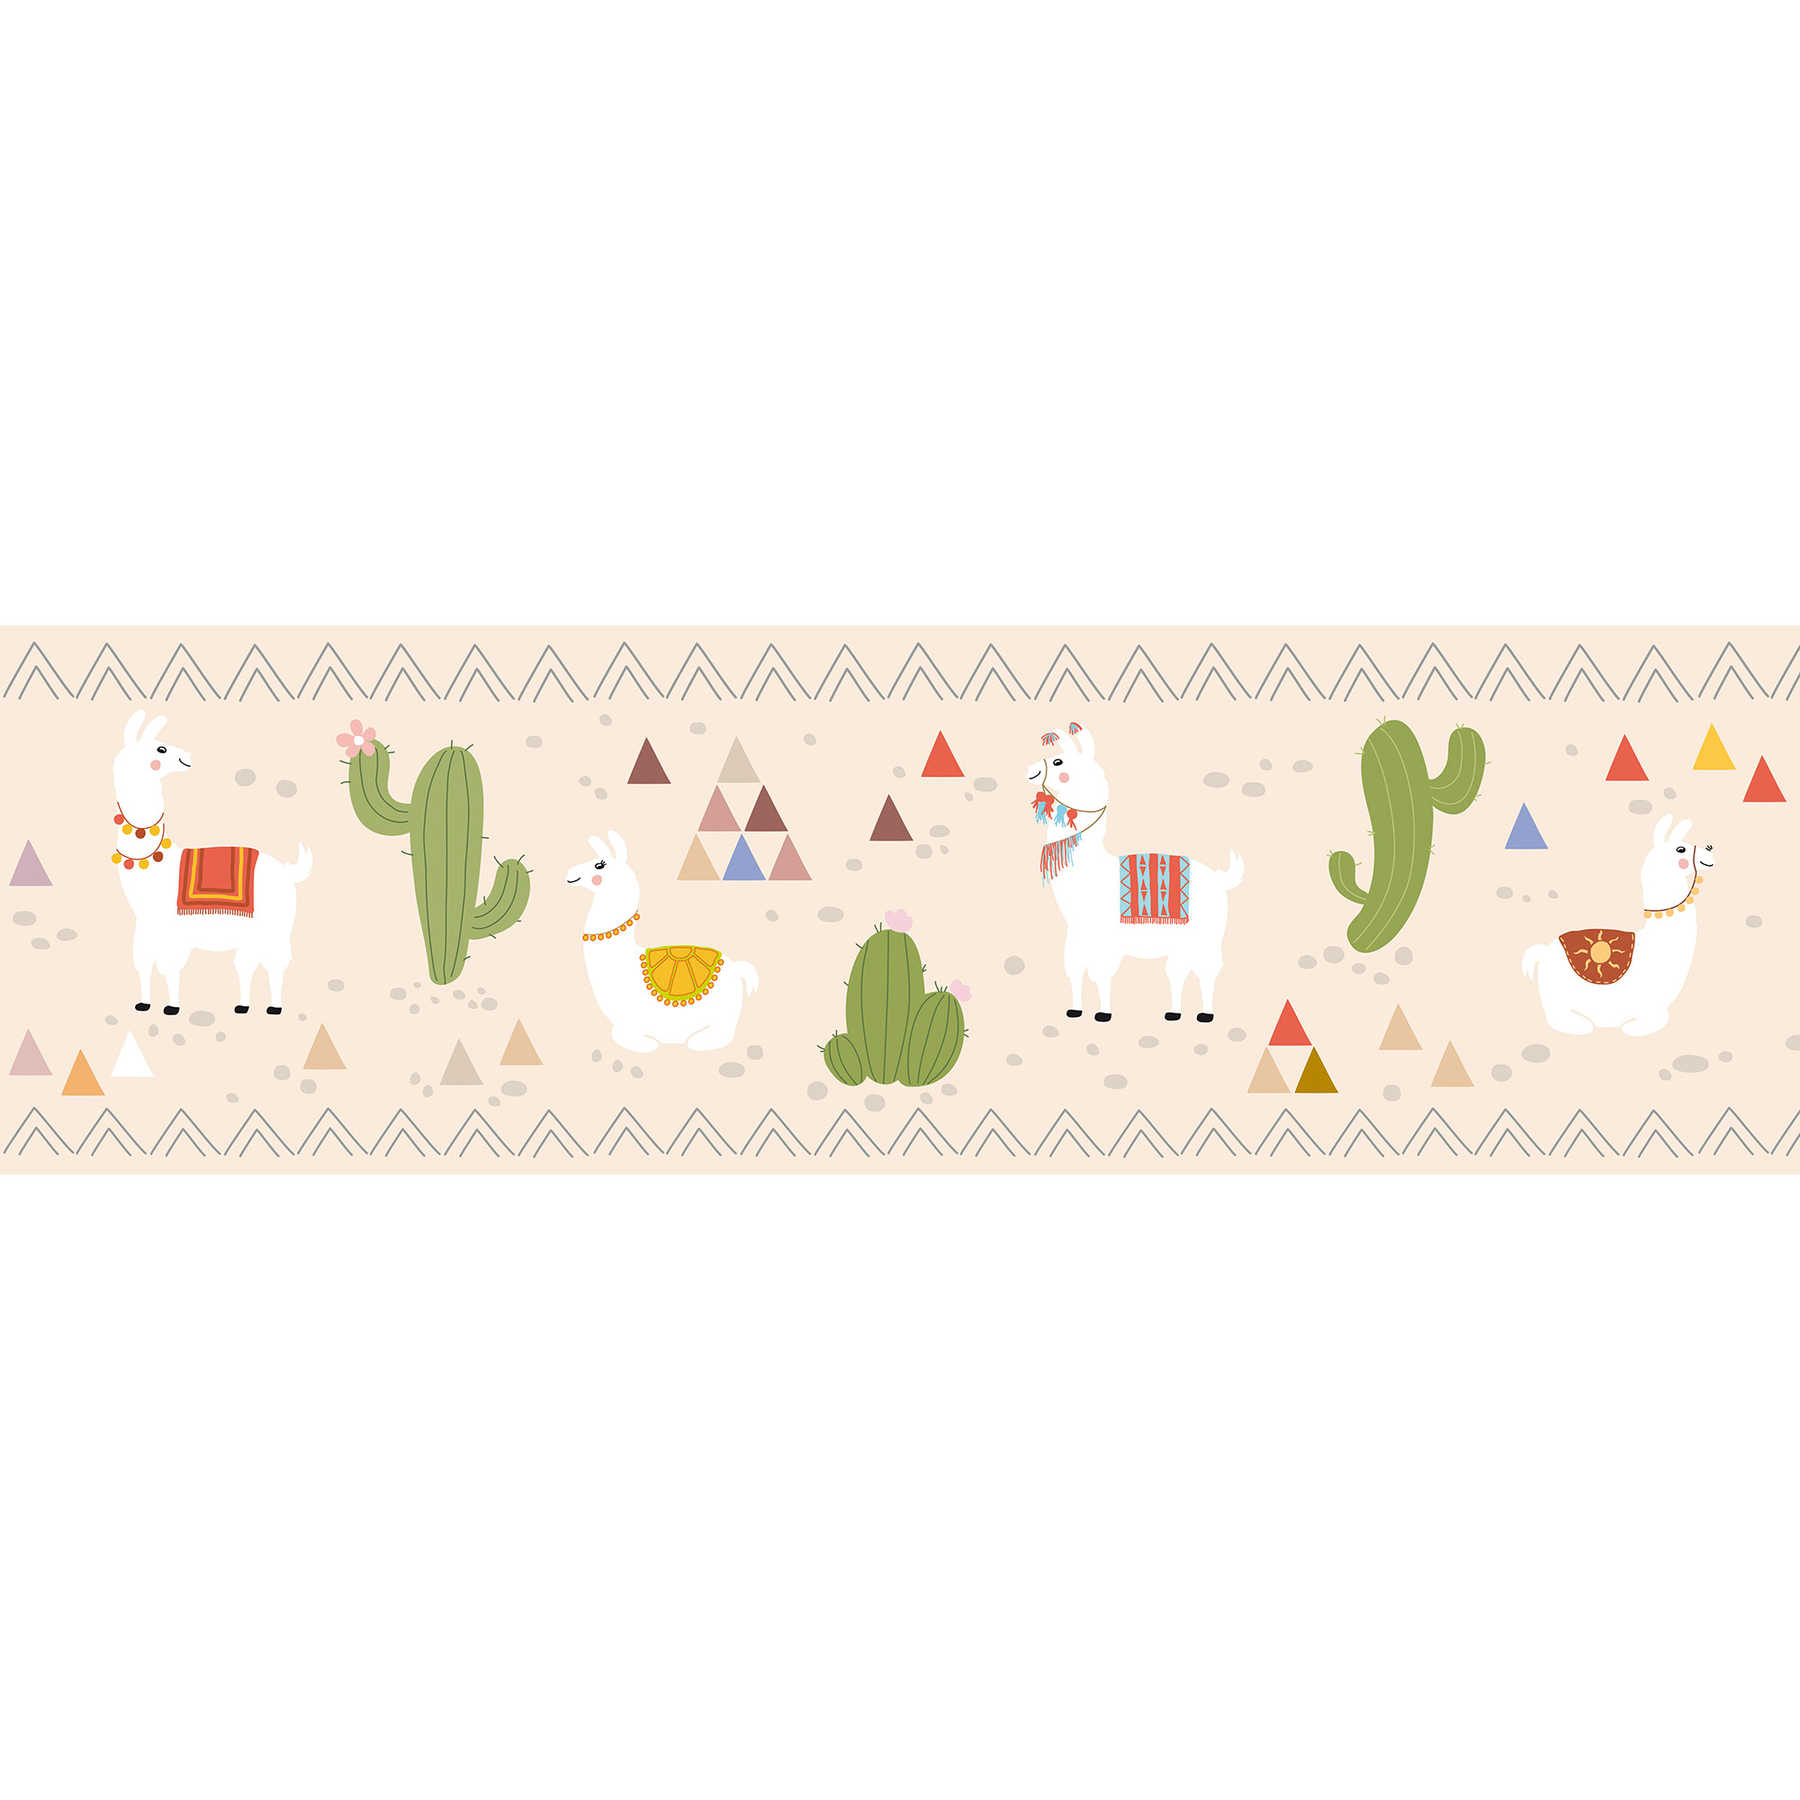 Exciting children border "Llamas in their home" - Beige, Green, Red
